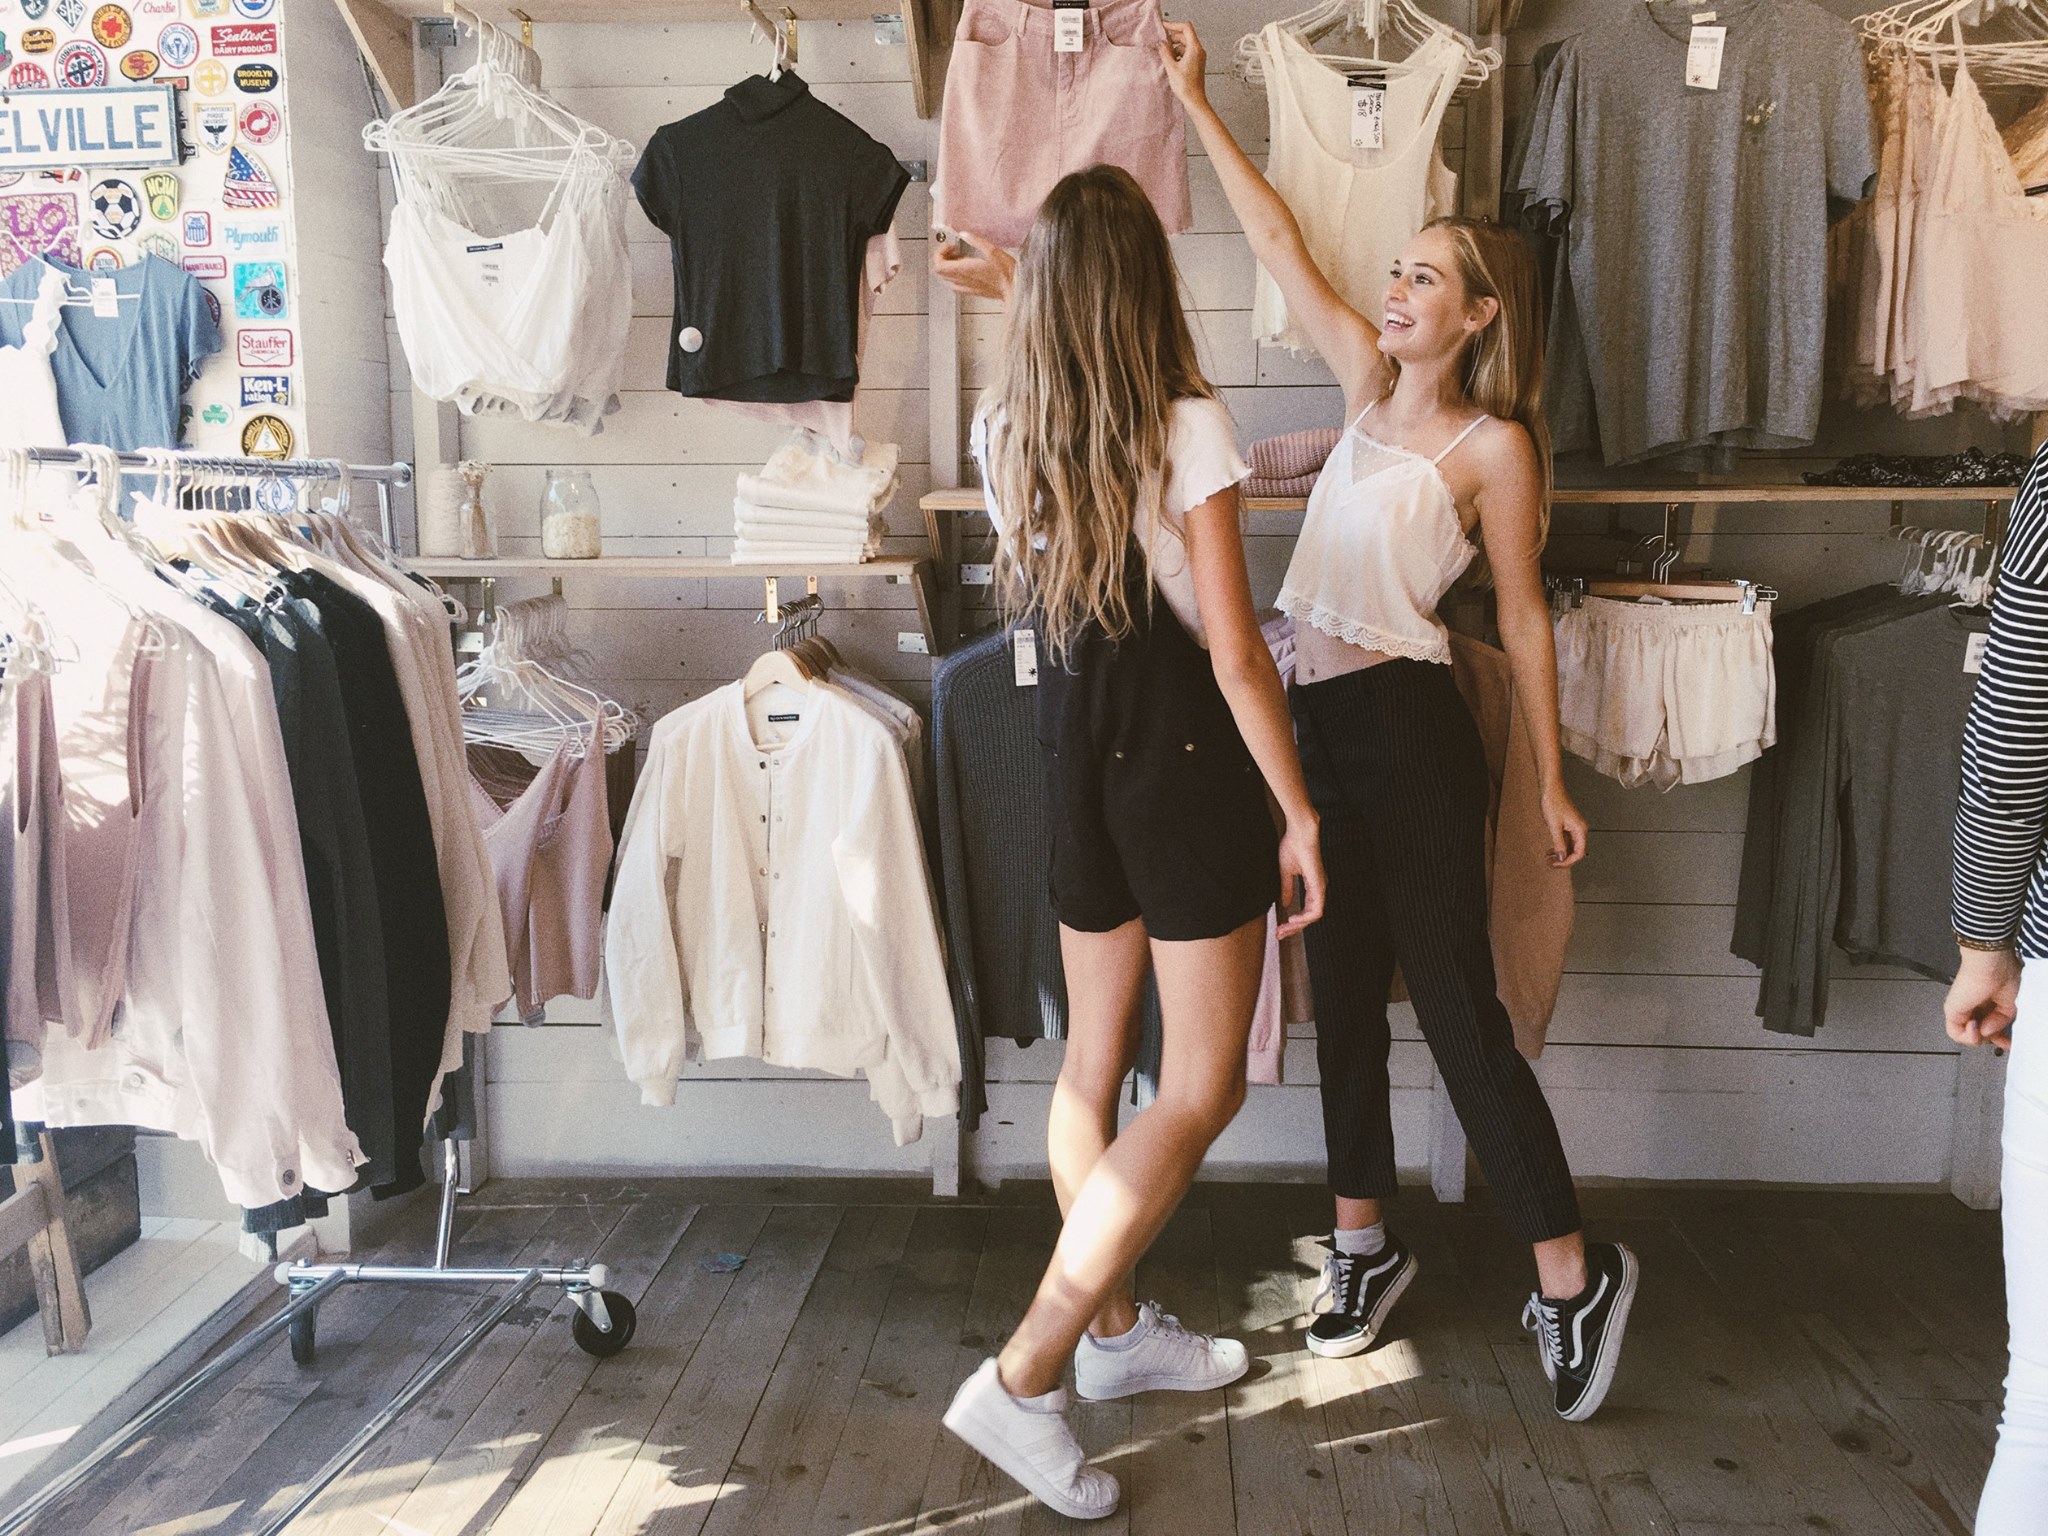 Brandy Melville shoppers reveal they no longer fit into store's